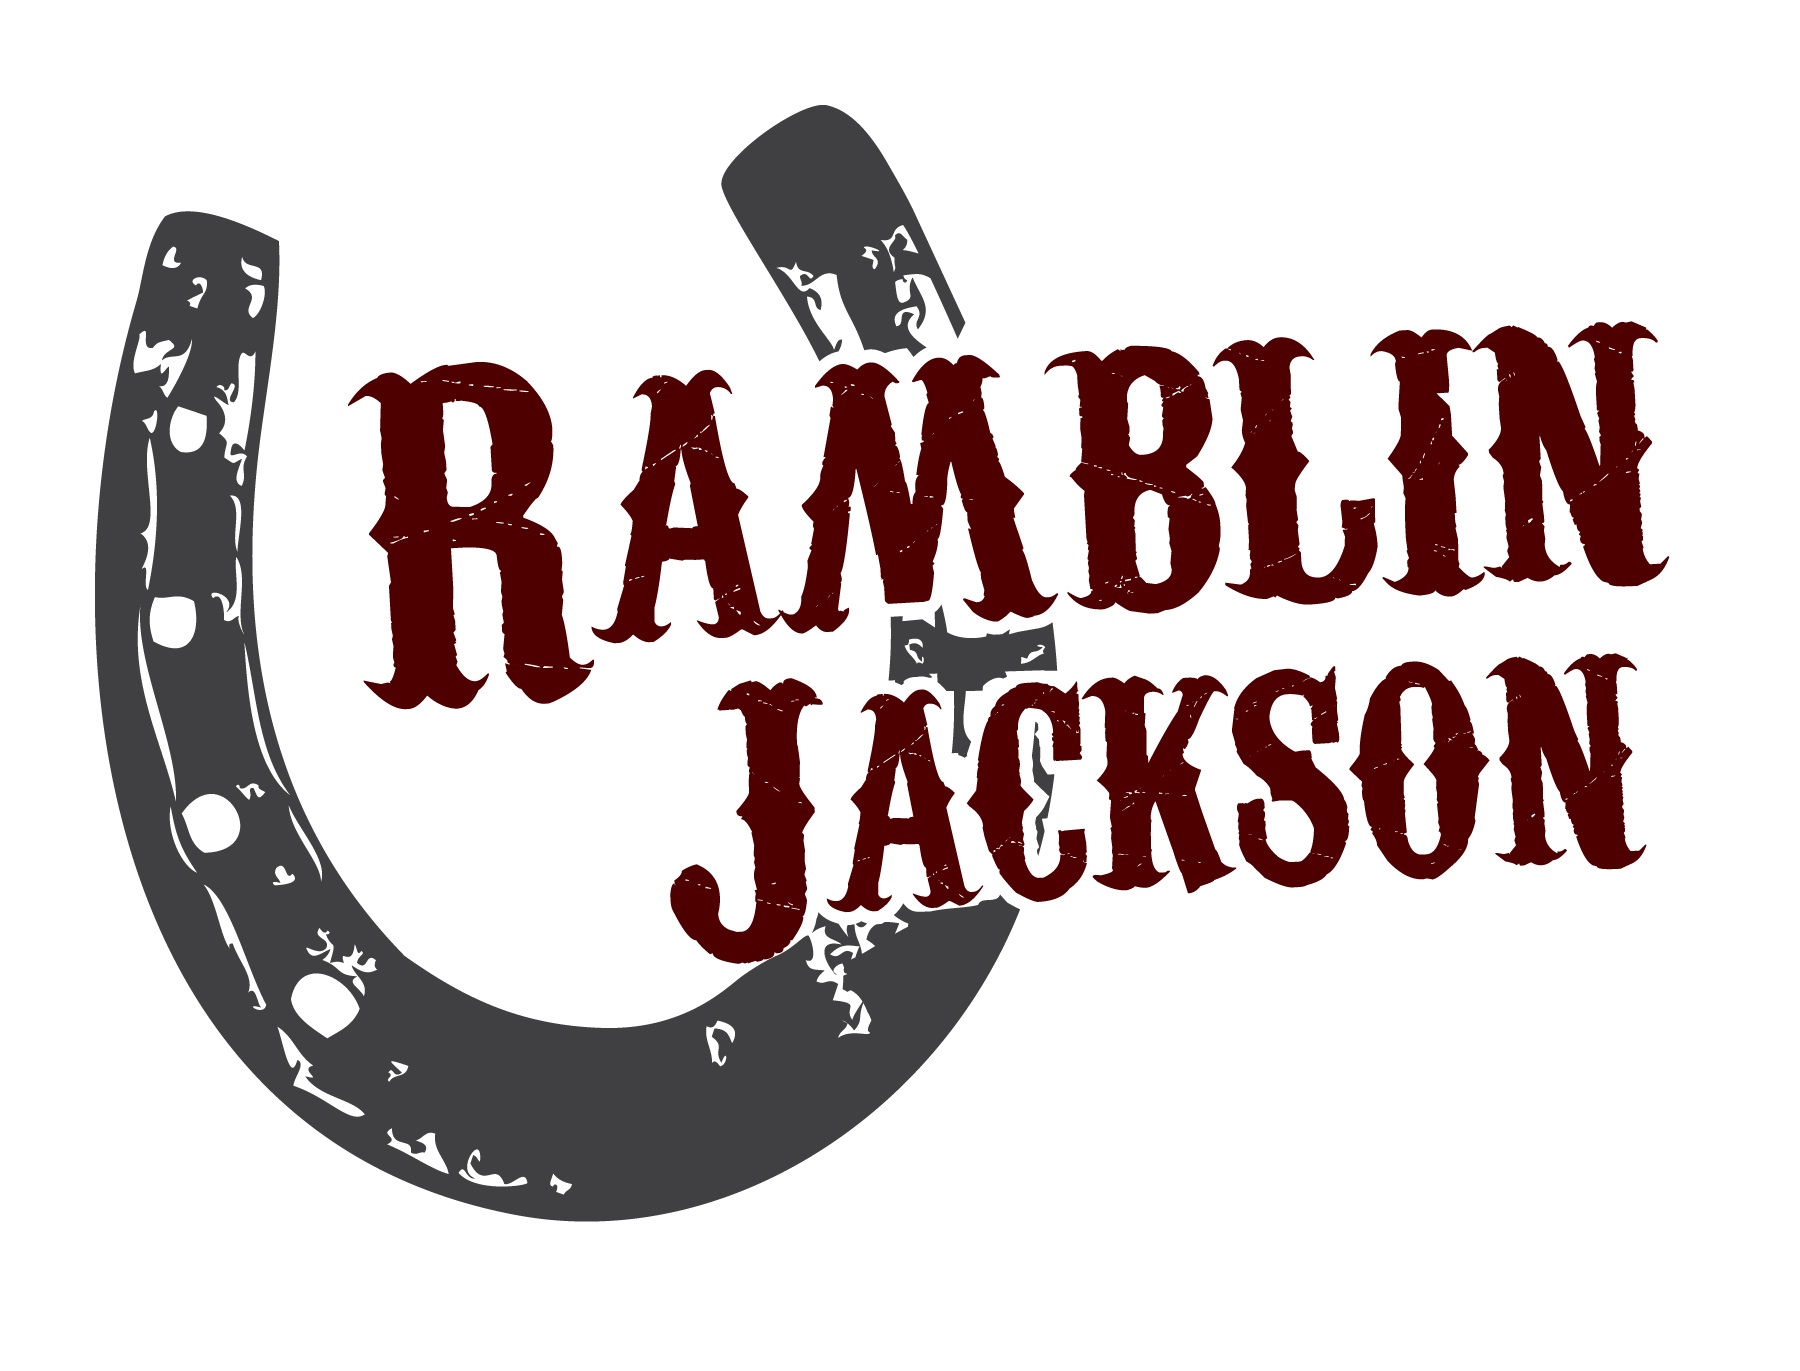 Presented by Ramblin Jackson, a digital marketing agency that works with service area businesses across the US, this workshop will teach the latest actionable tactics to get found for local searches.